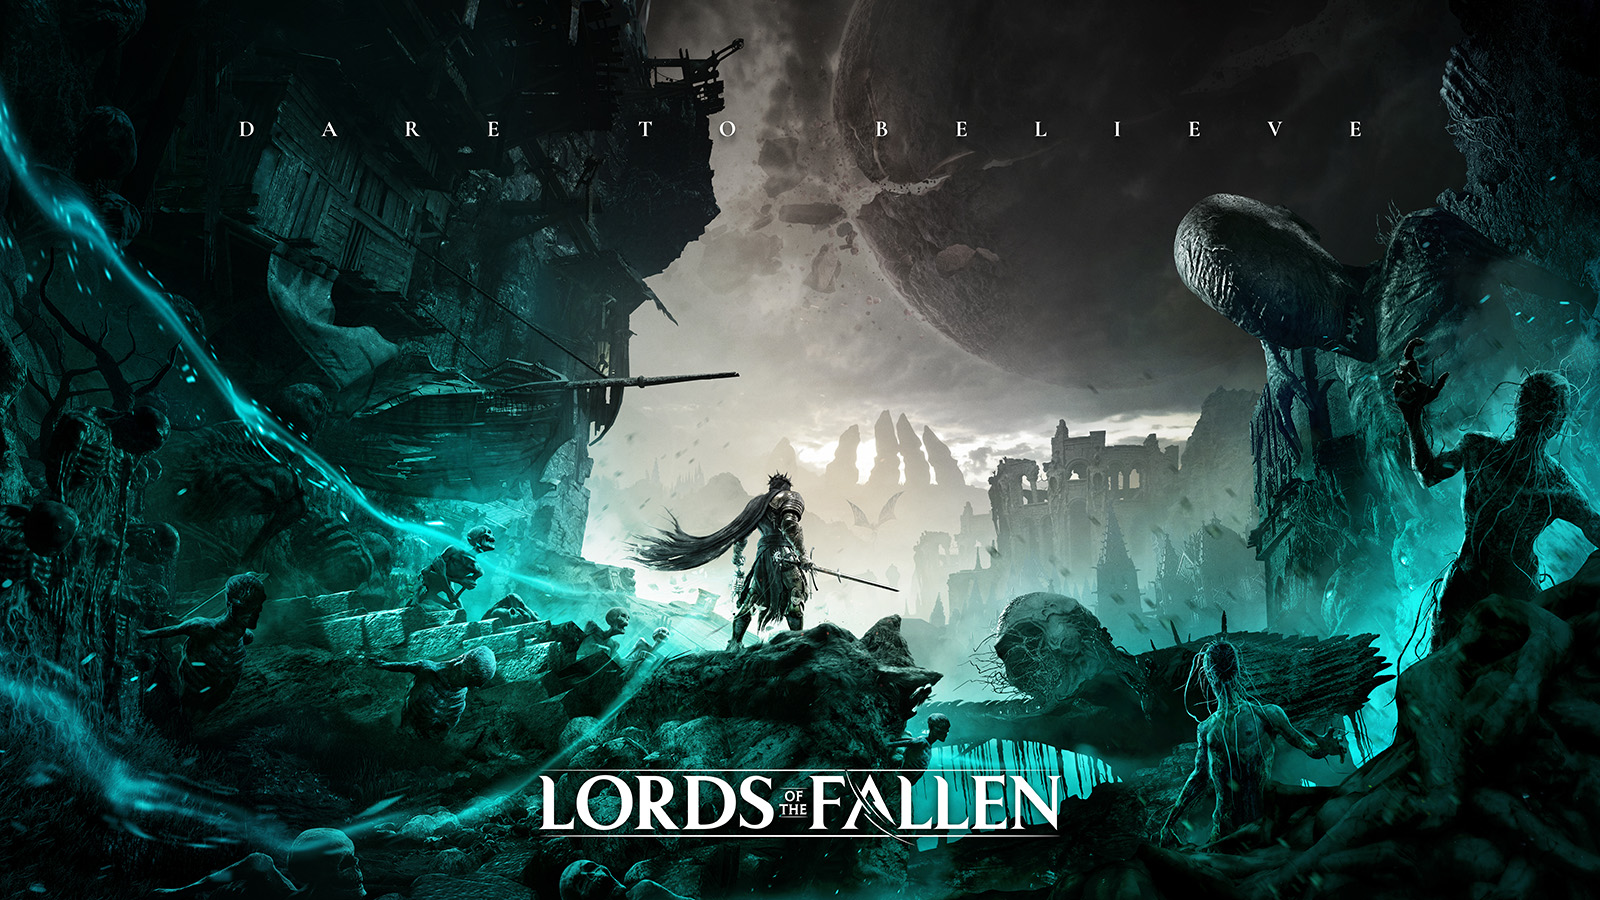 Explore The Nightmarish World Of Lords Of The Fallen In Brand-New Story Trailer